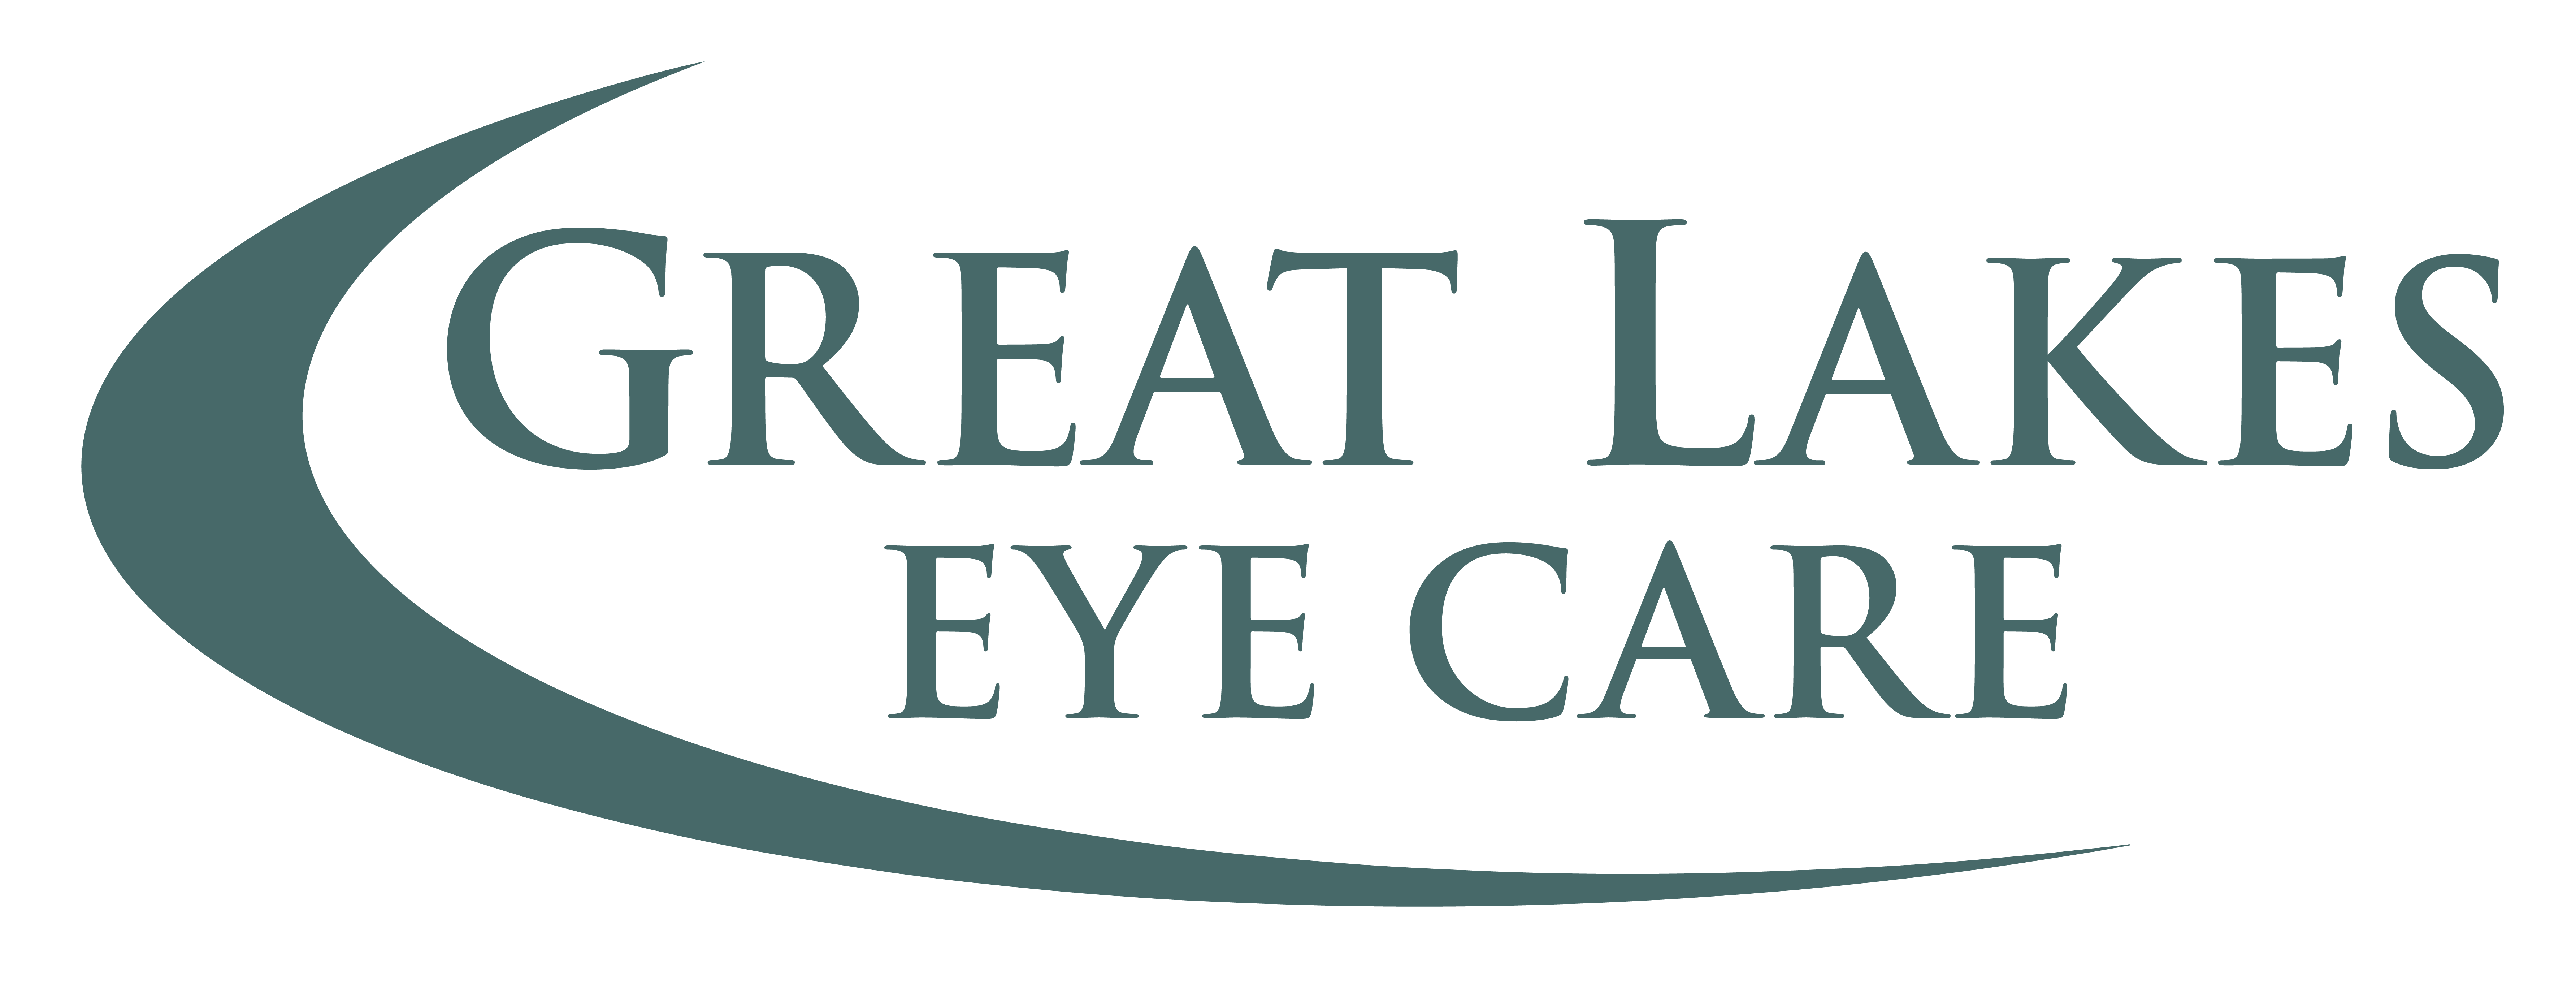 The Great Lakes Eye